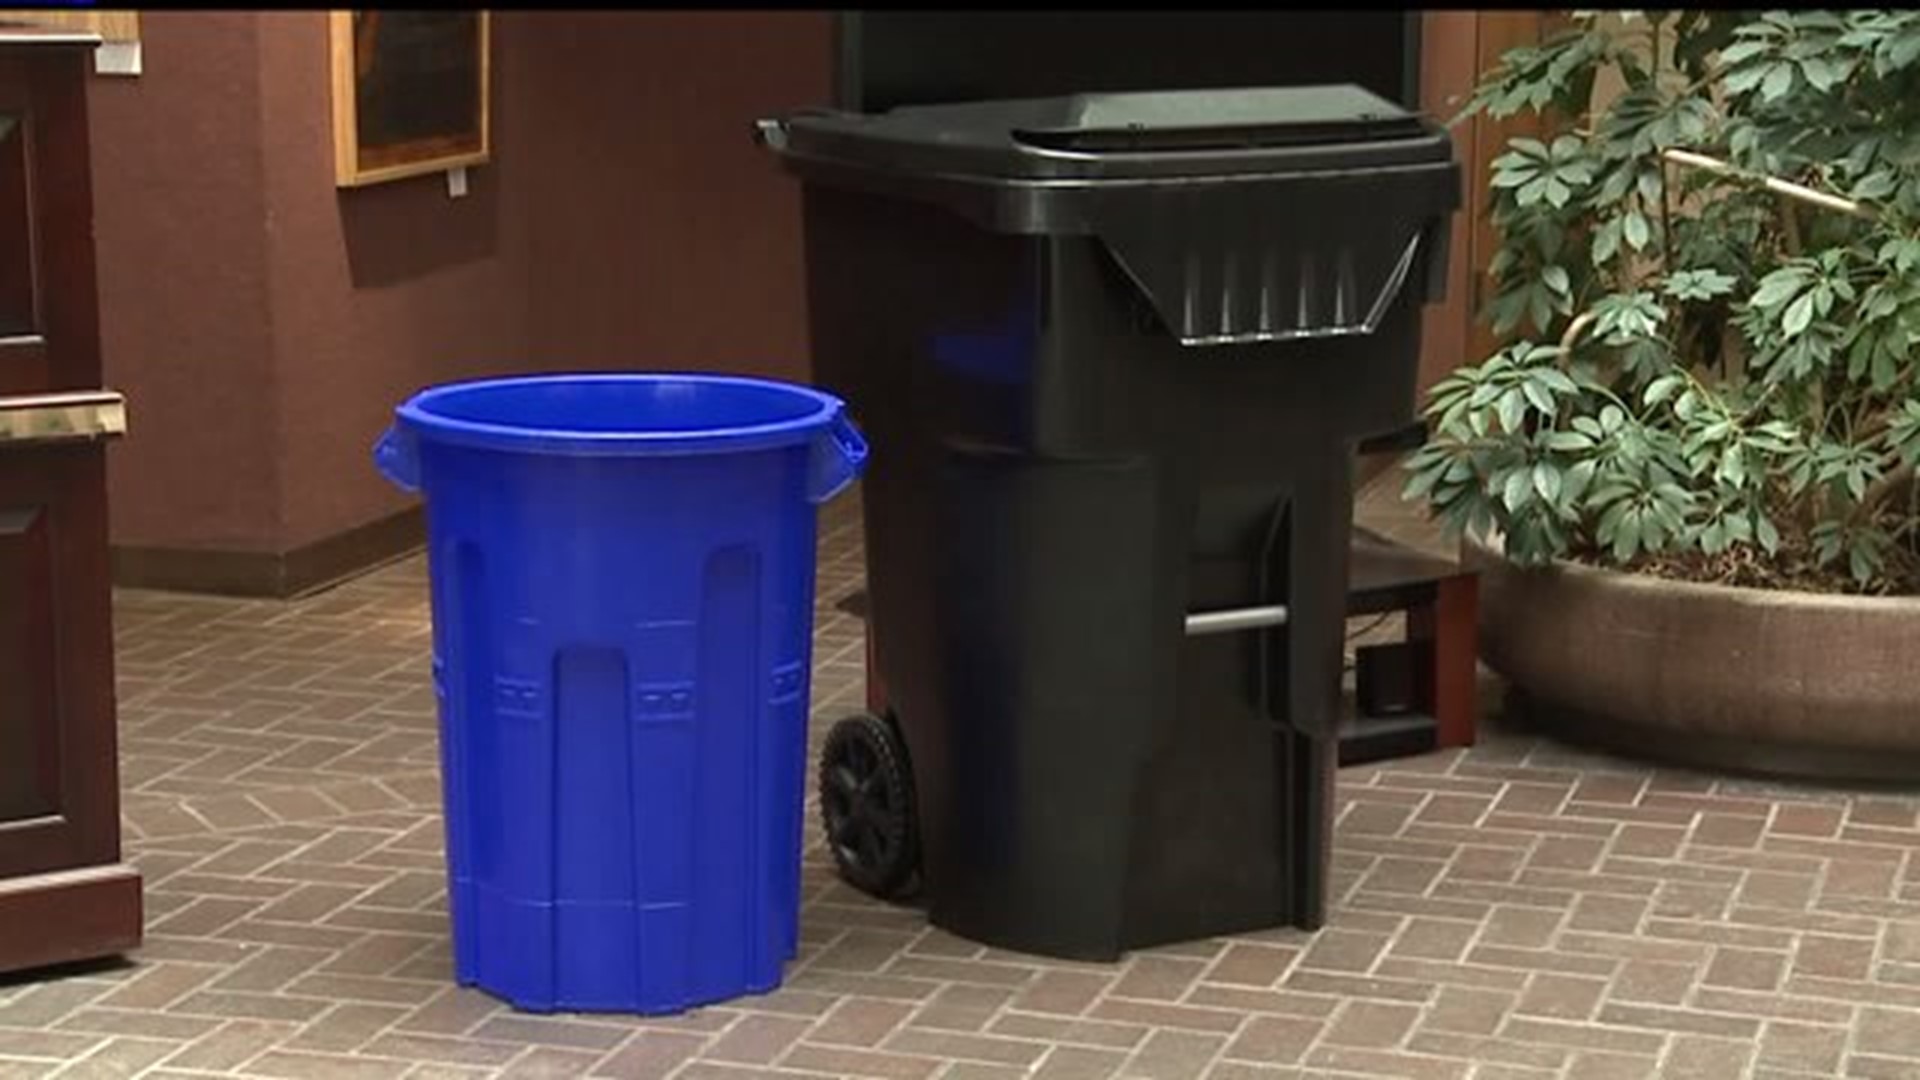 New recycling program for Harrisburg residents